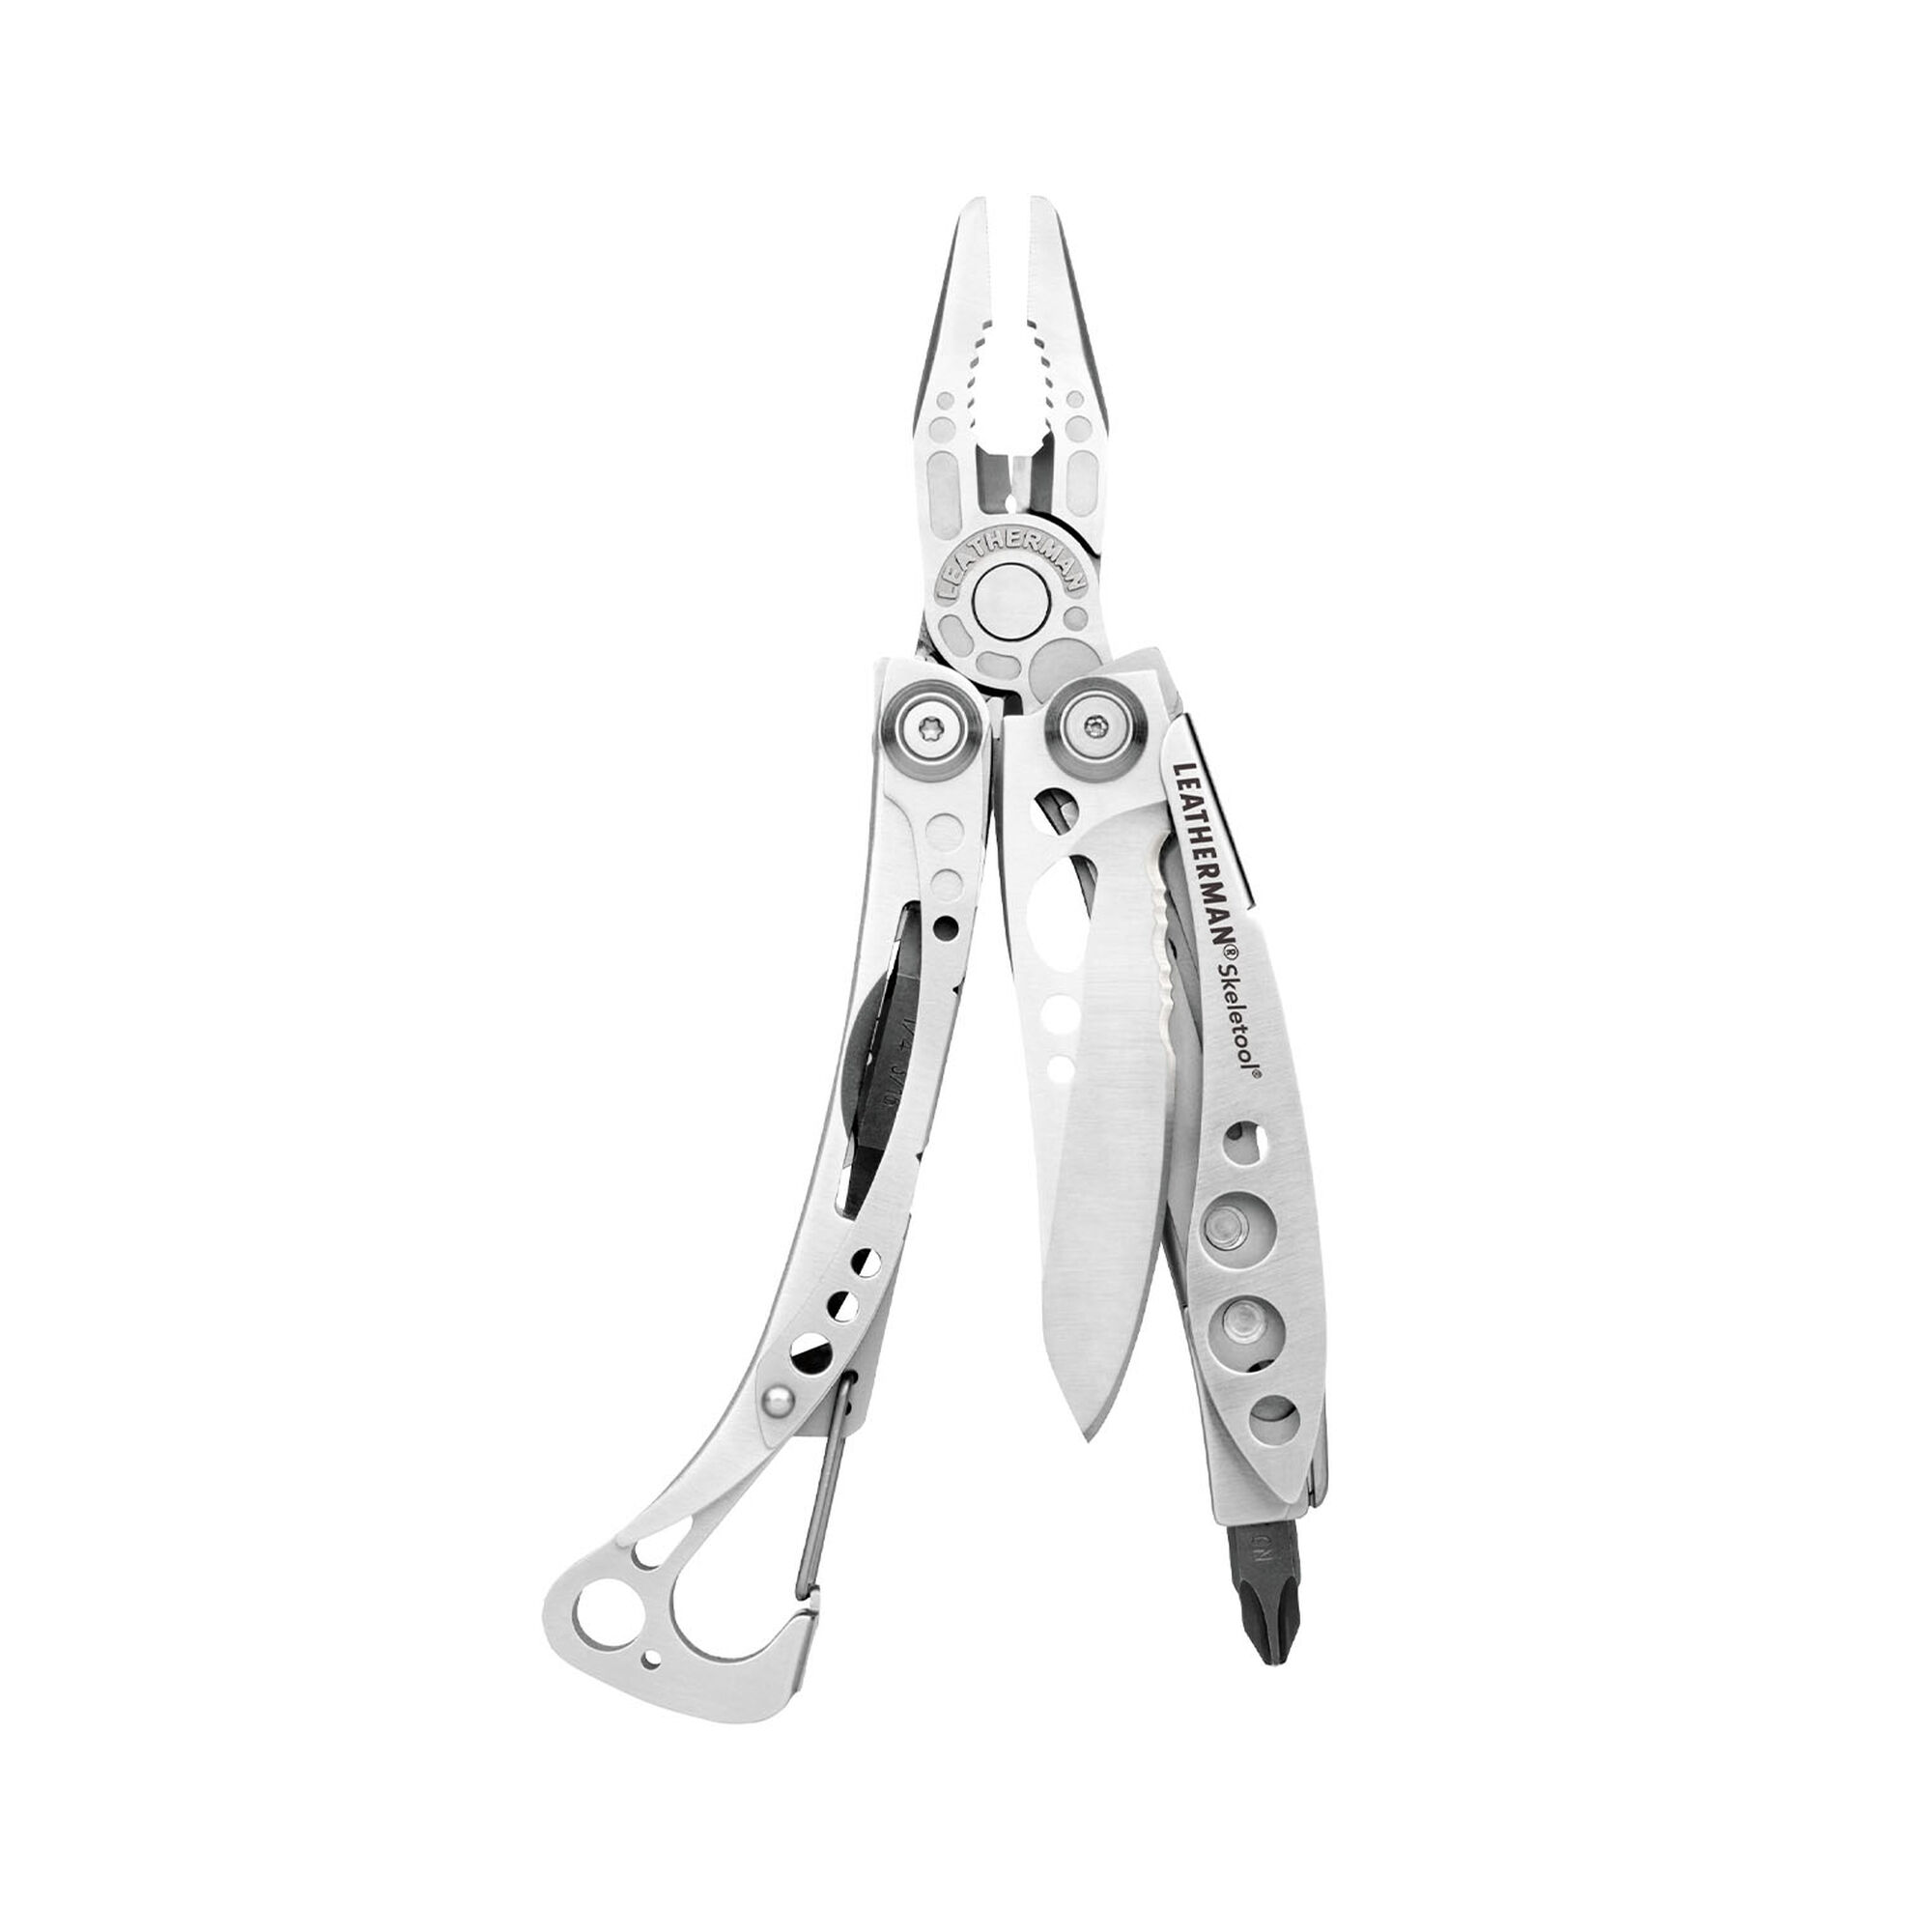 Multitool 24-in-1 with Mini Tools Knife Pliers and 11 Bits - Multi Tool All  in One Multi Function Gear for Men Best Multi-tool Kit for Work EDC Camping  Backpacking Survival - Great